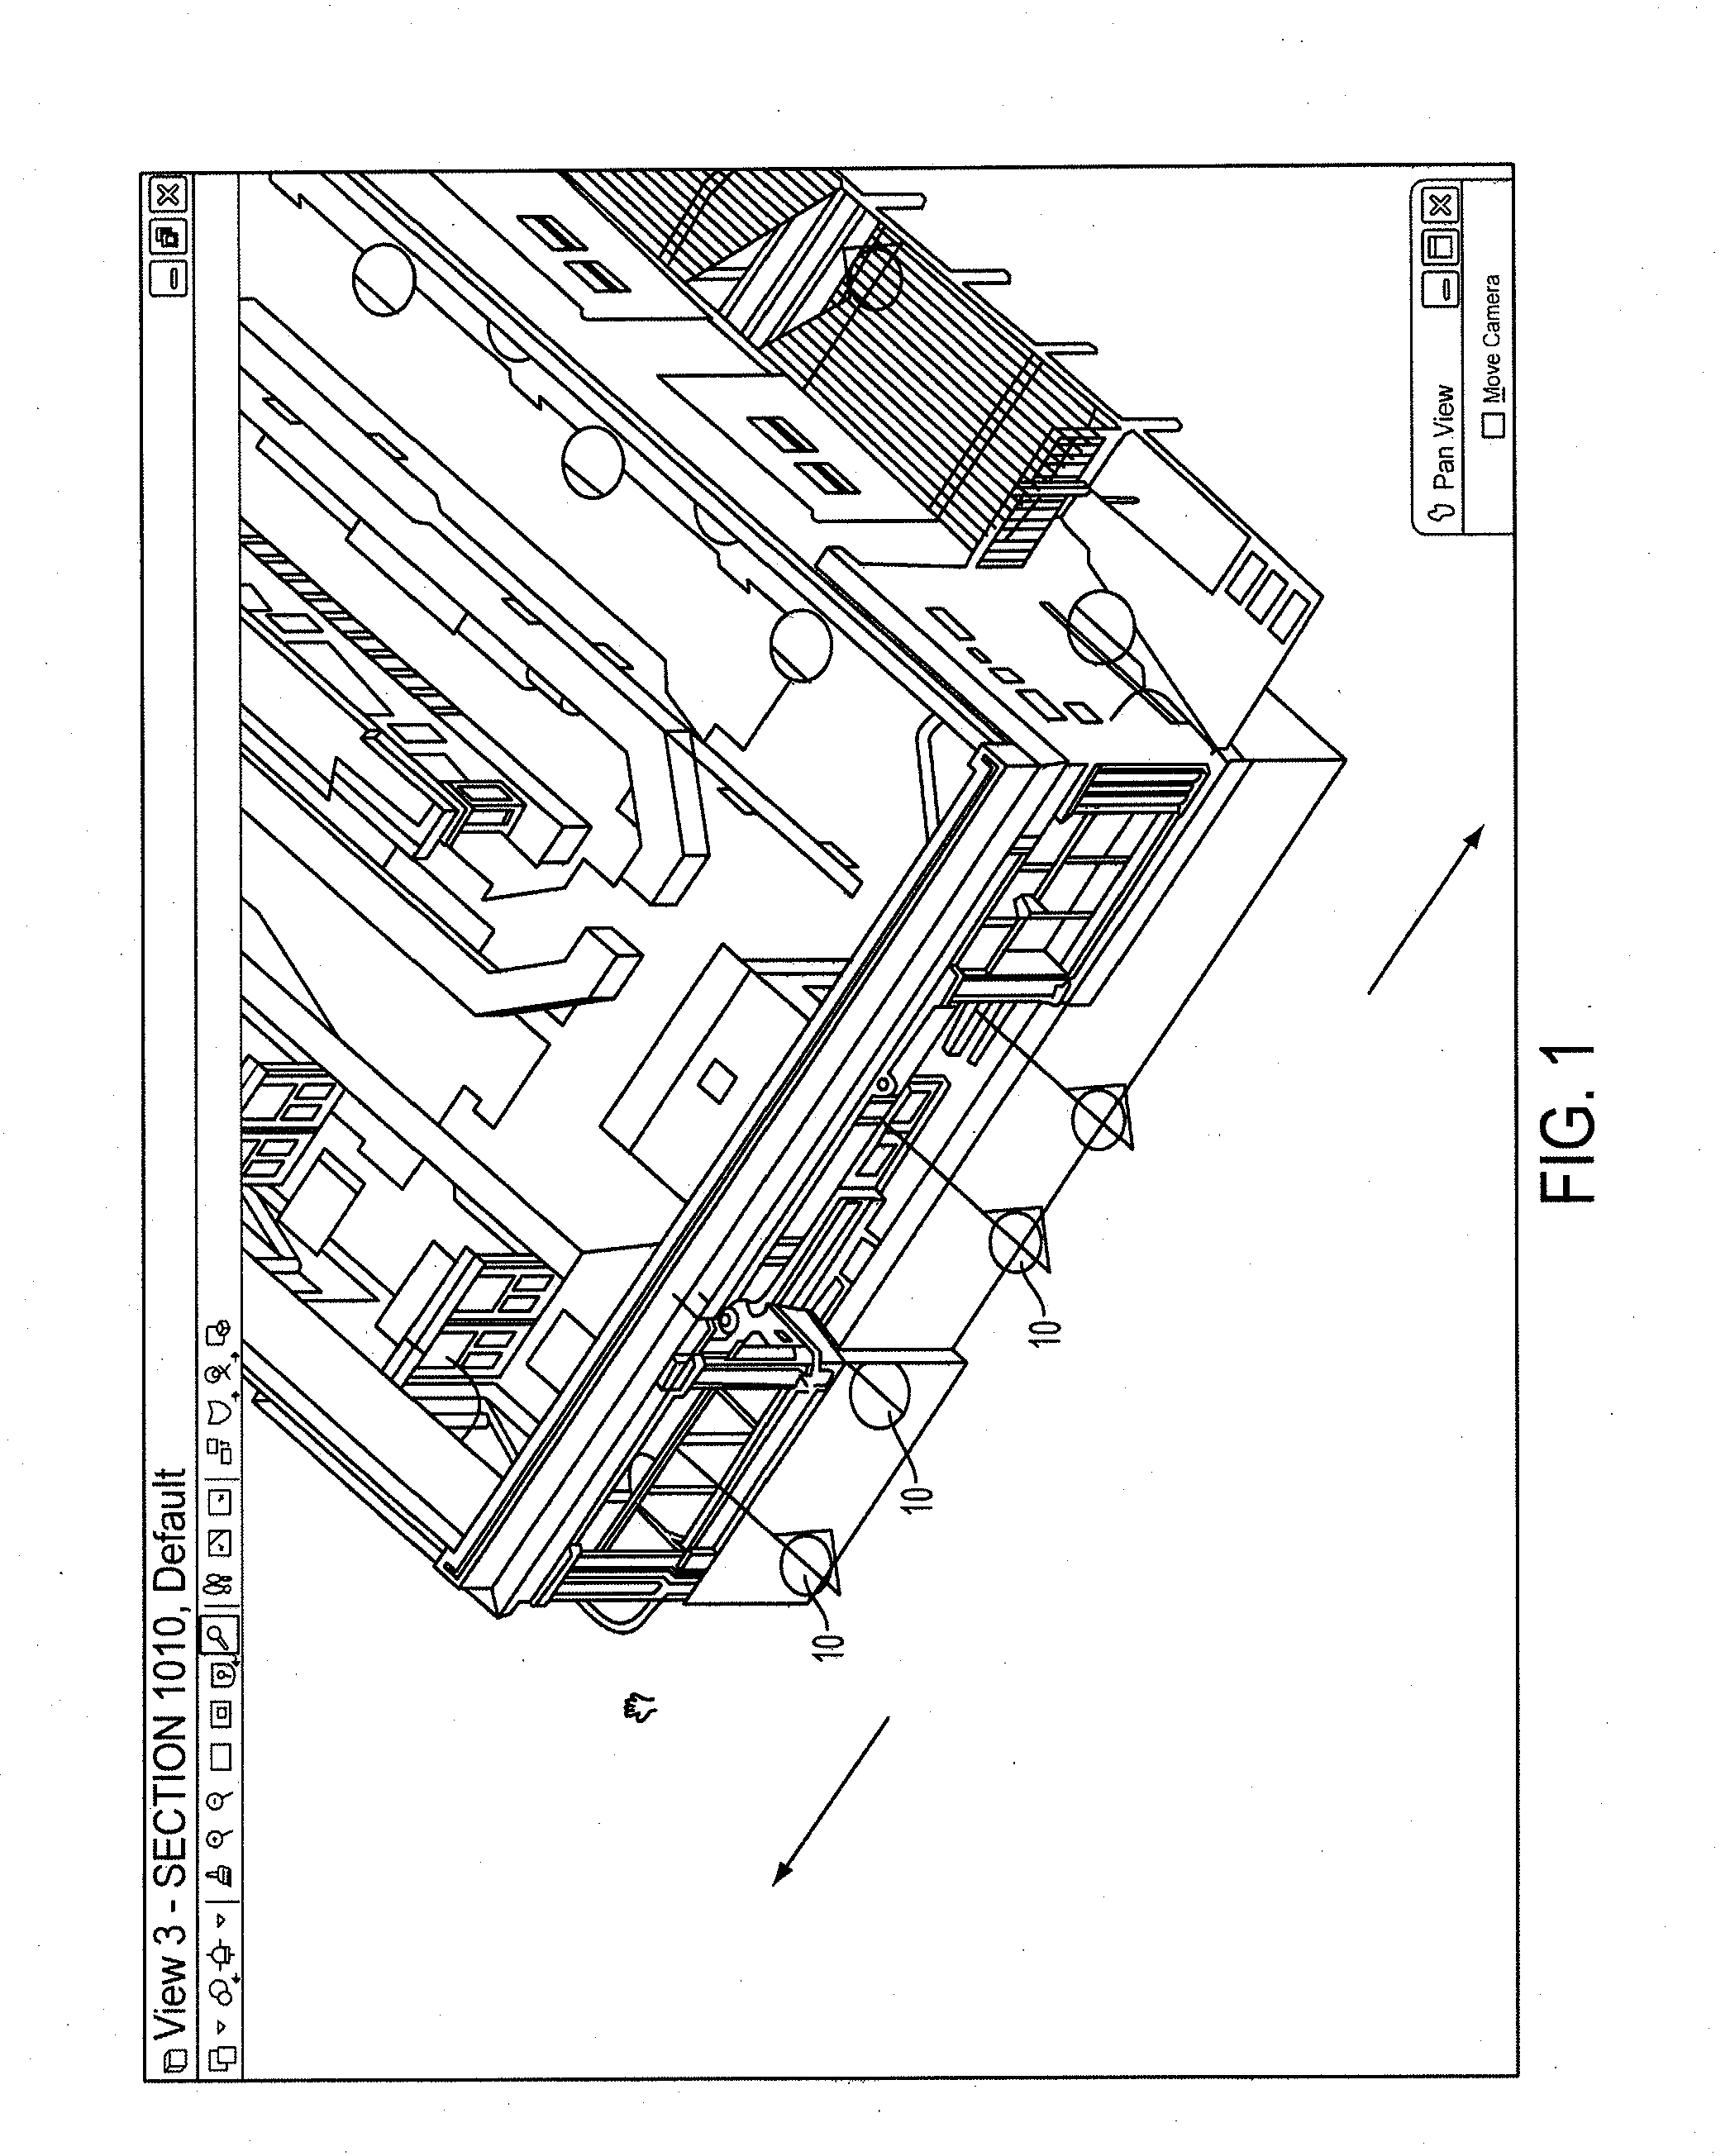 Multi-dimensional artifact assemblage for infrastructure and other assets with interface node mediators